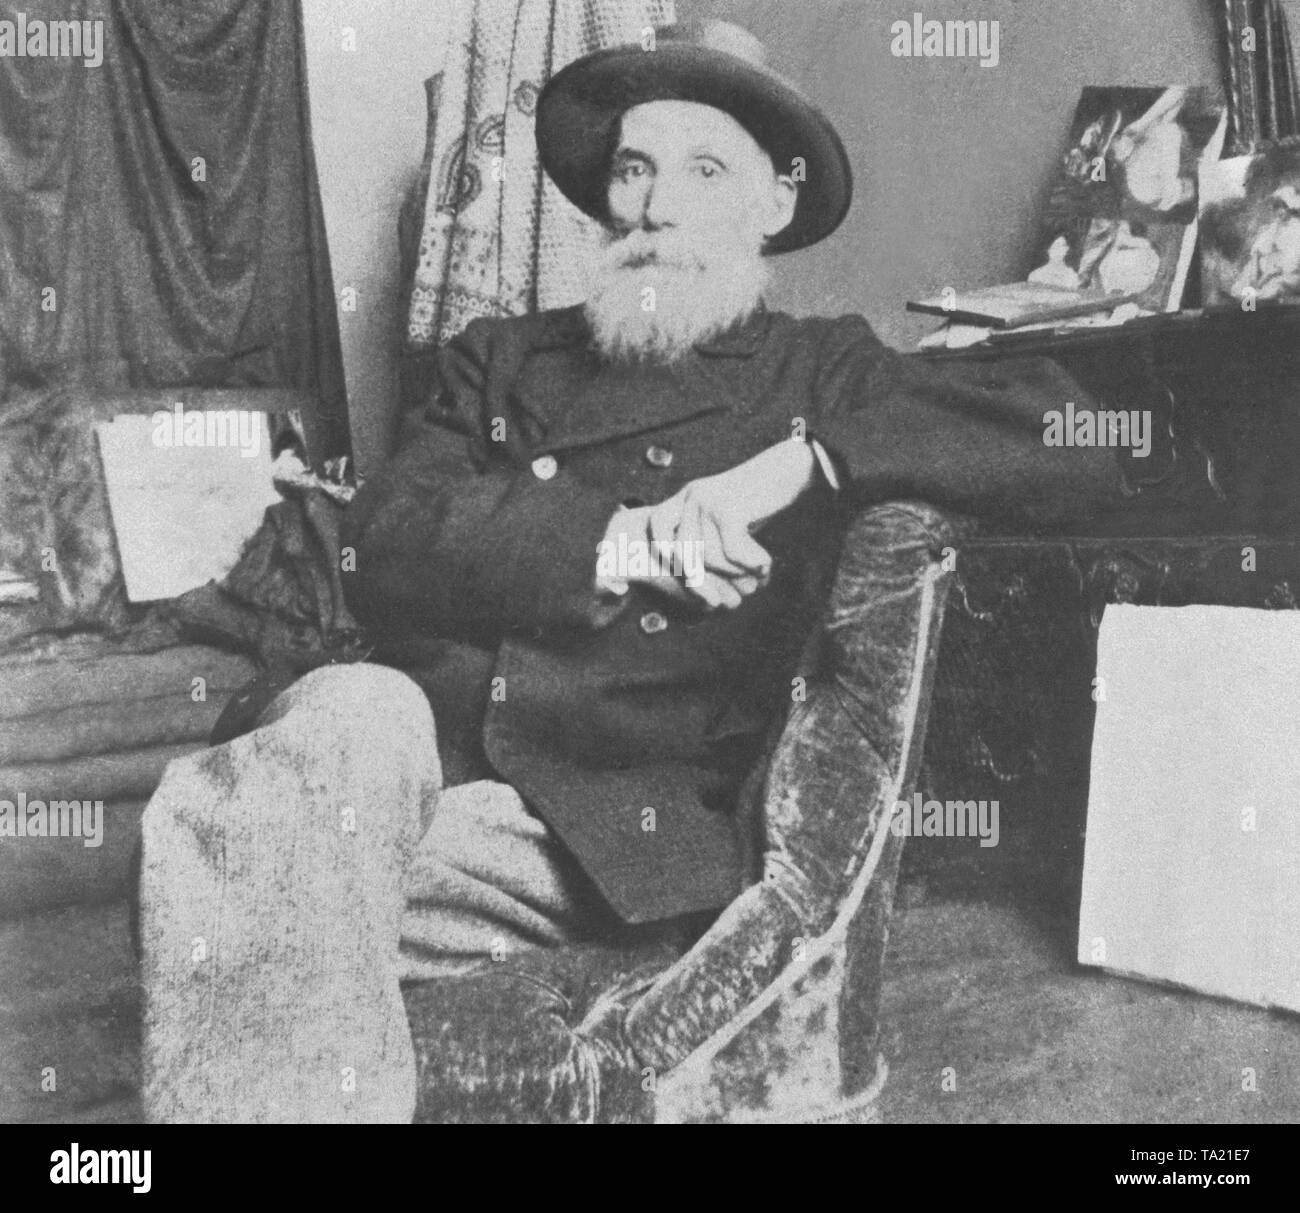 The photo shows the French impressionist Pierre Auguste Renoir (1841-1914) at the turn of the century in his studio in Fontainebleau. Stock Photo